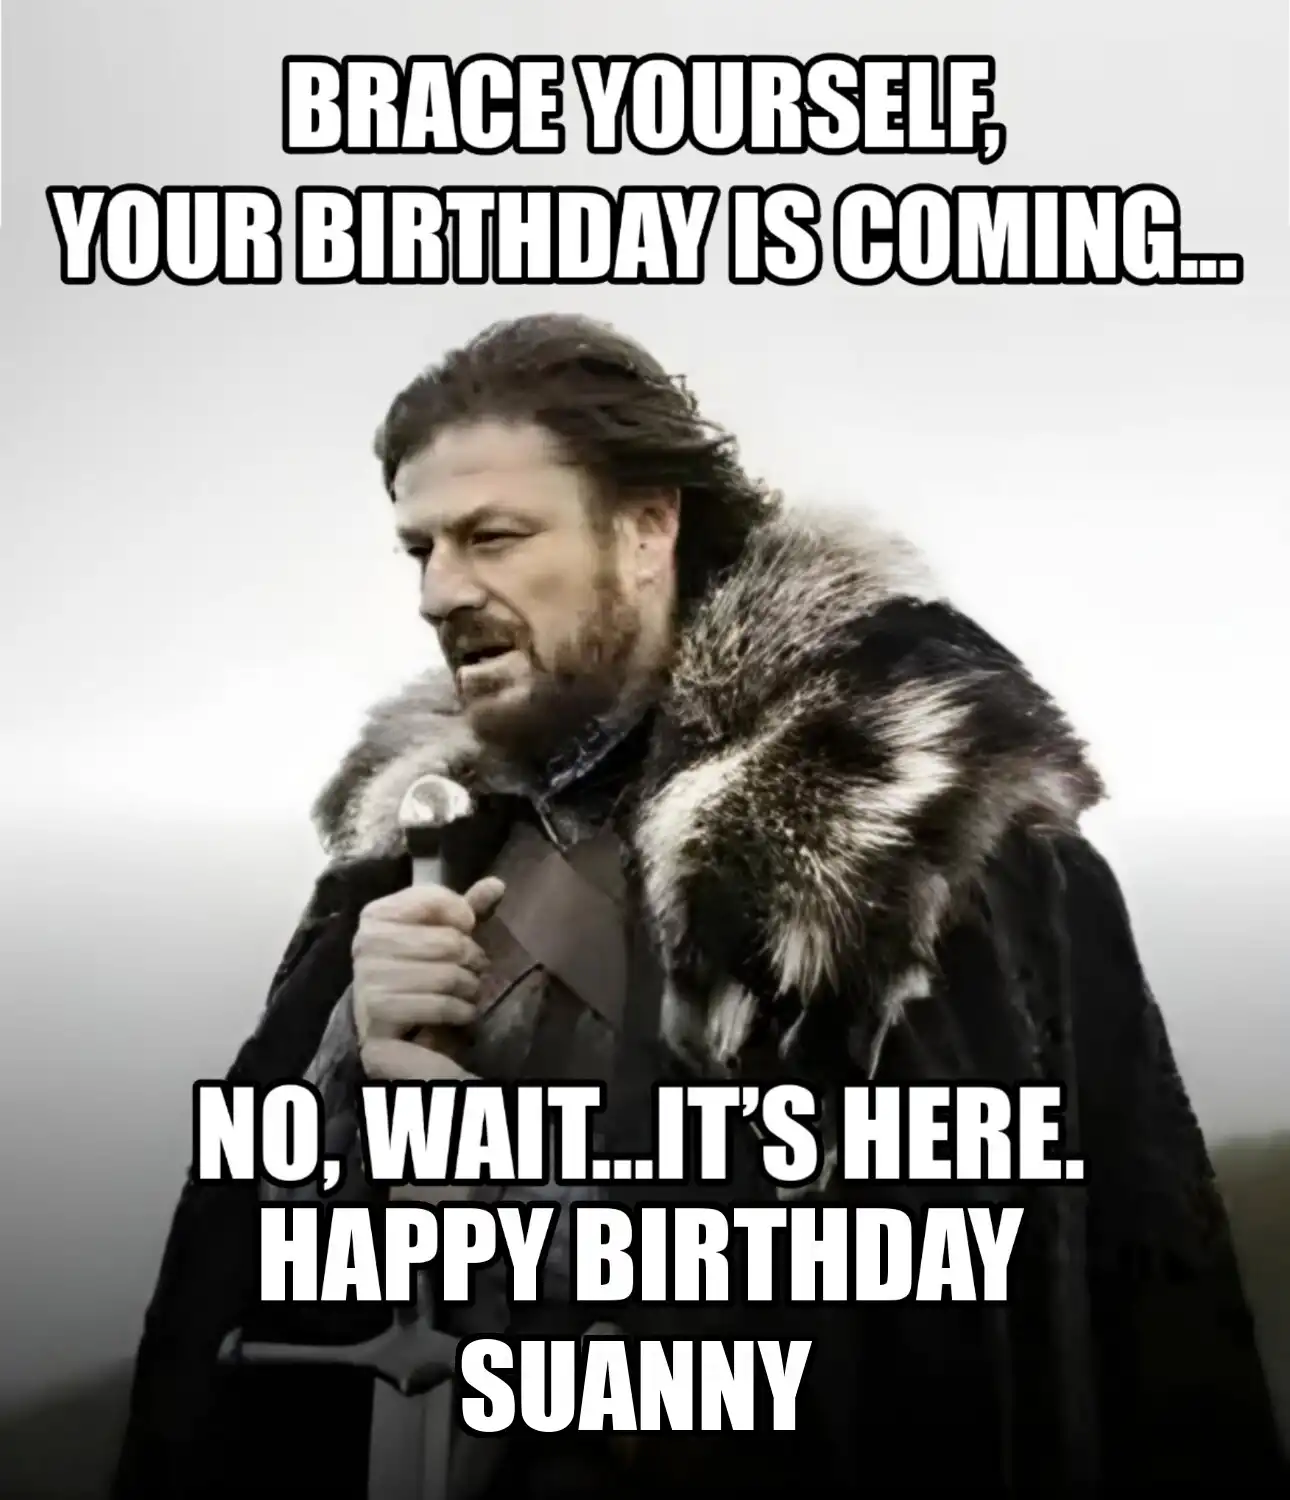 Happy Birthday Suanny Brace Yourself Your Birthday Is Coming Meme